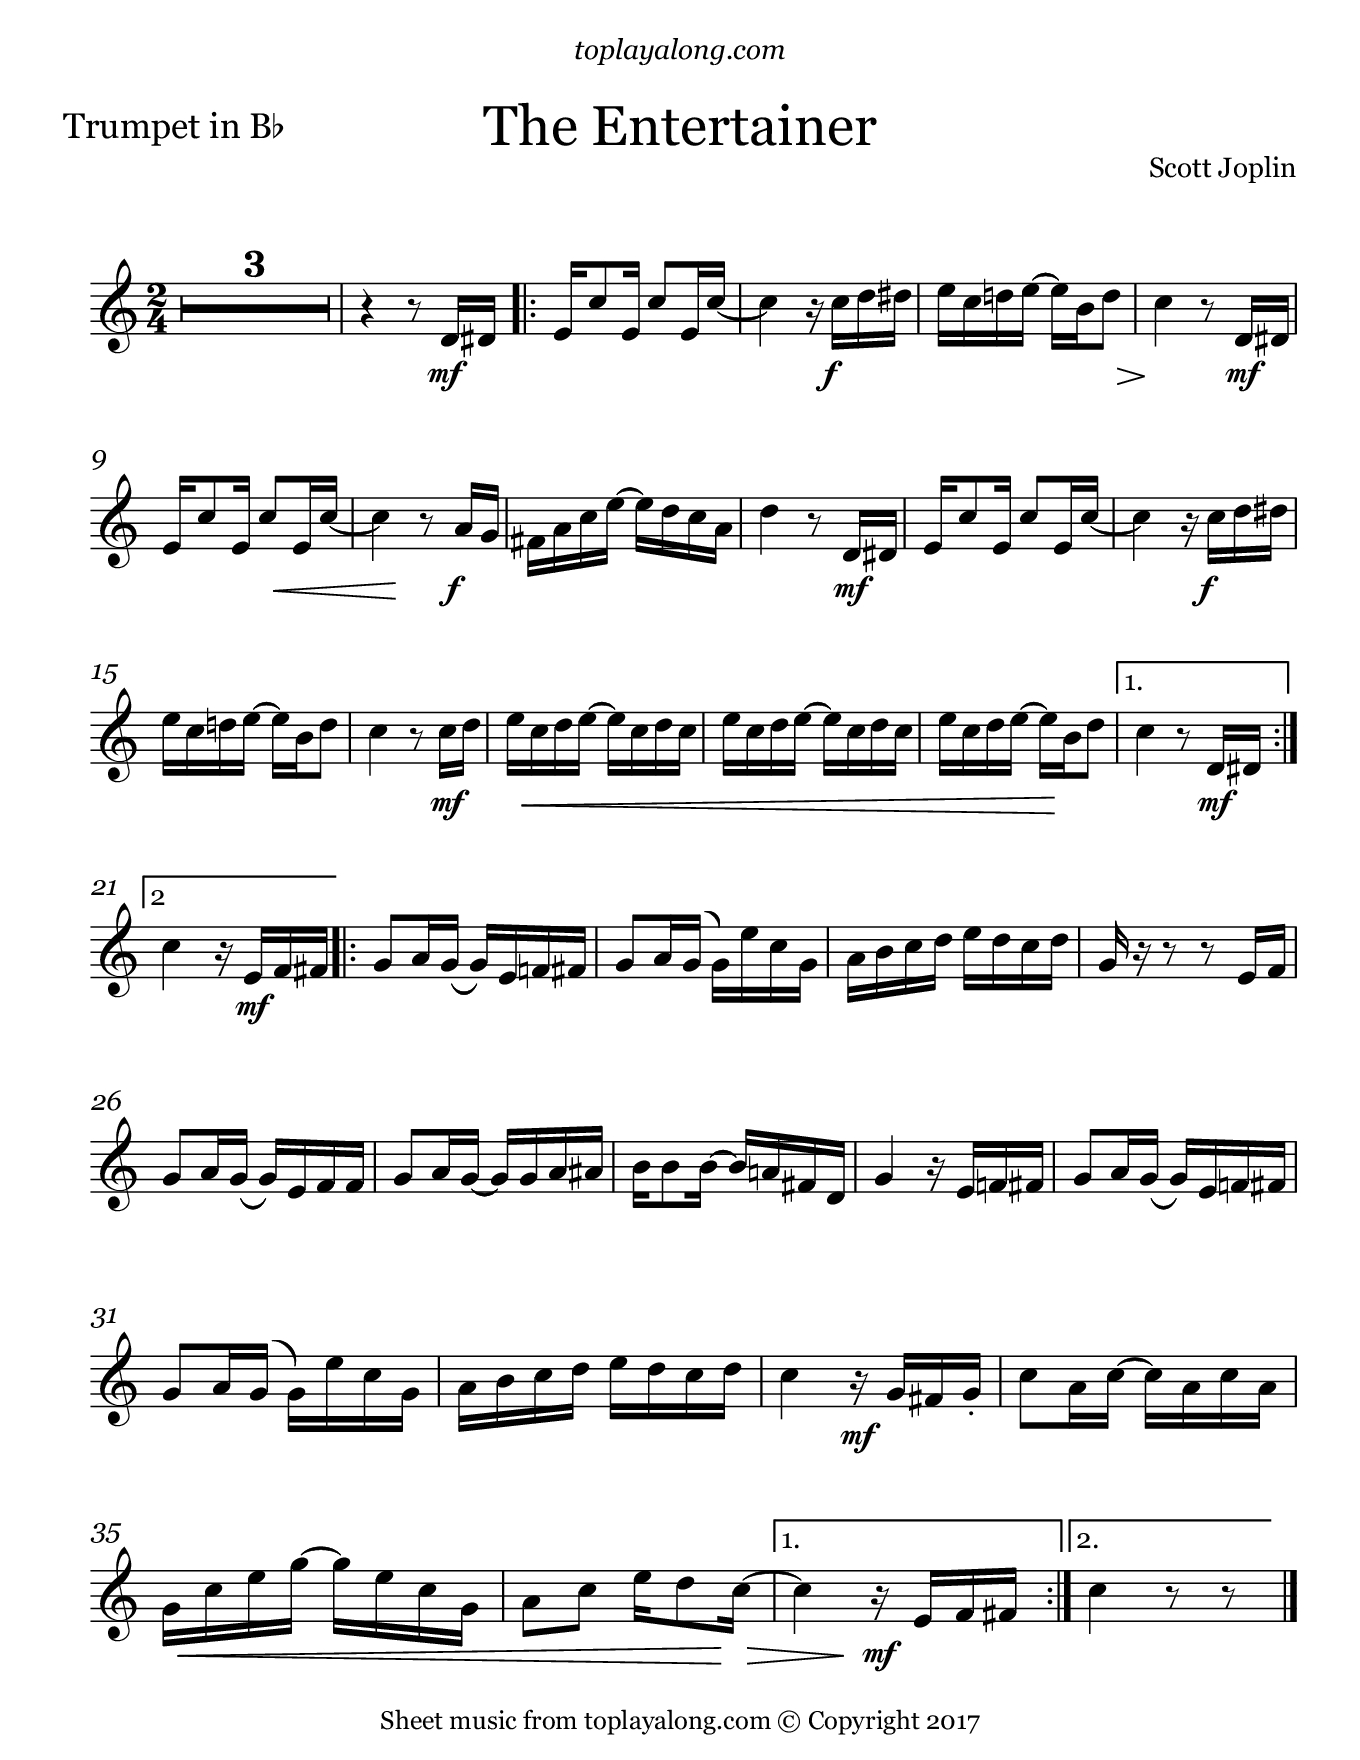 The Entertainer – Toplayalong - Free Printable Sheet Music For Trumpet